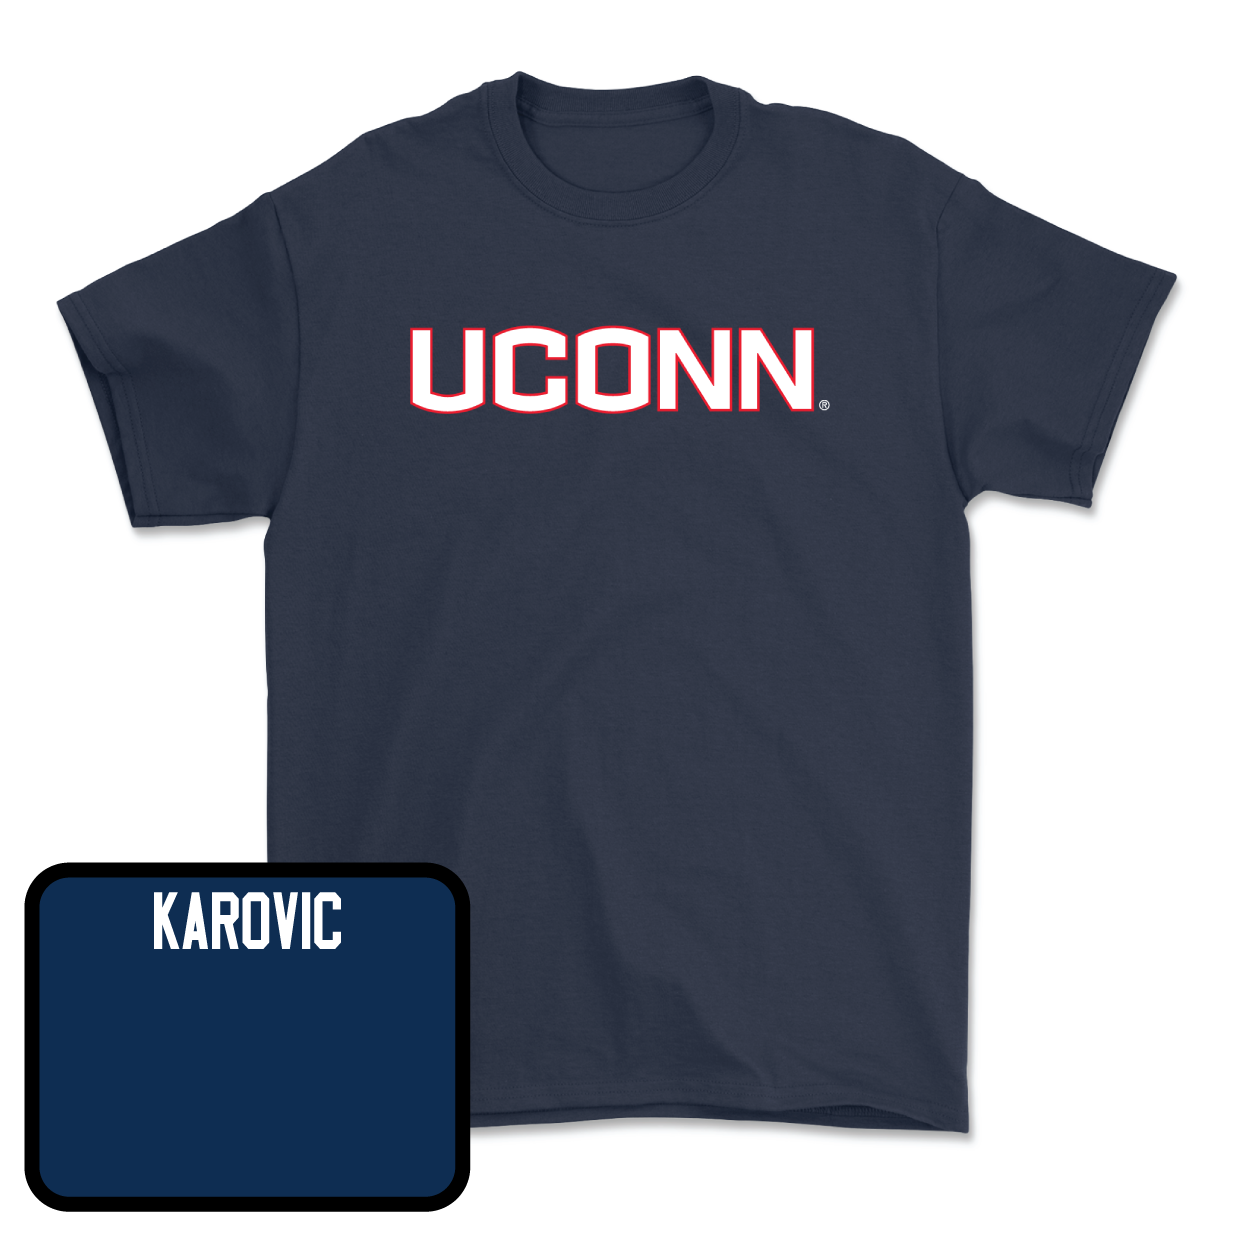 Navy Women's Rowing UConn Tee Youth Small / Emilie Karovic